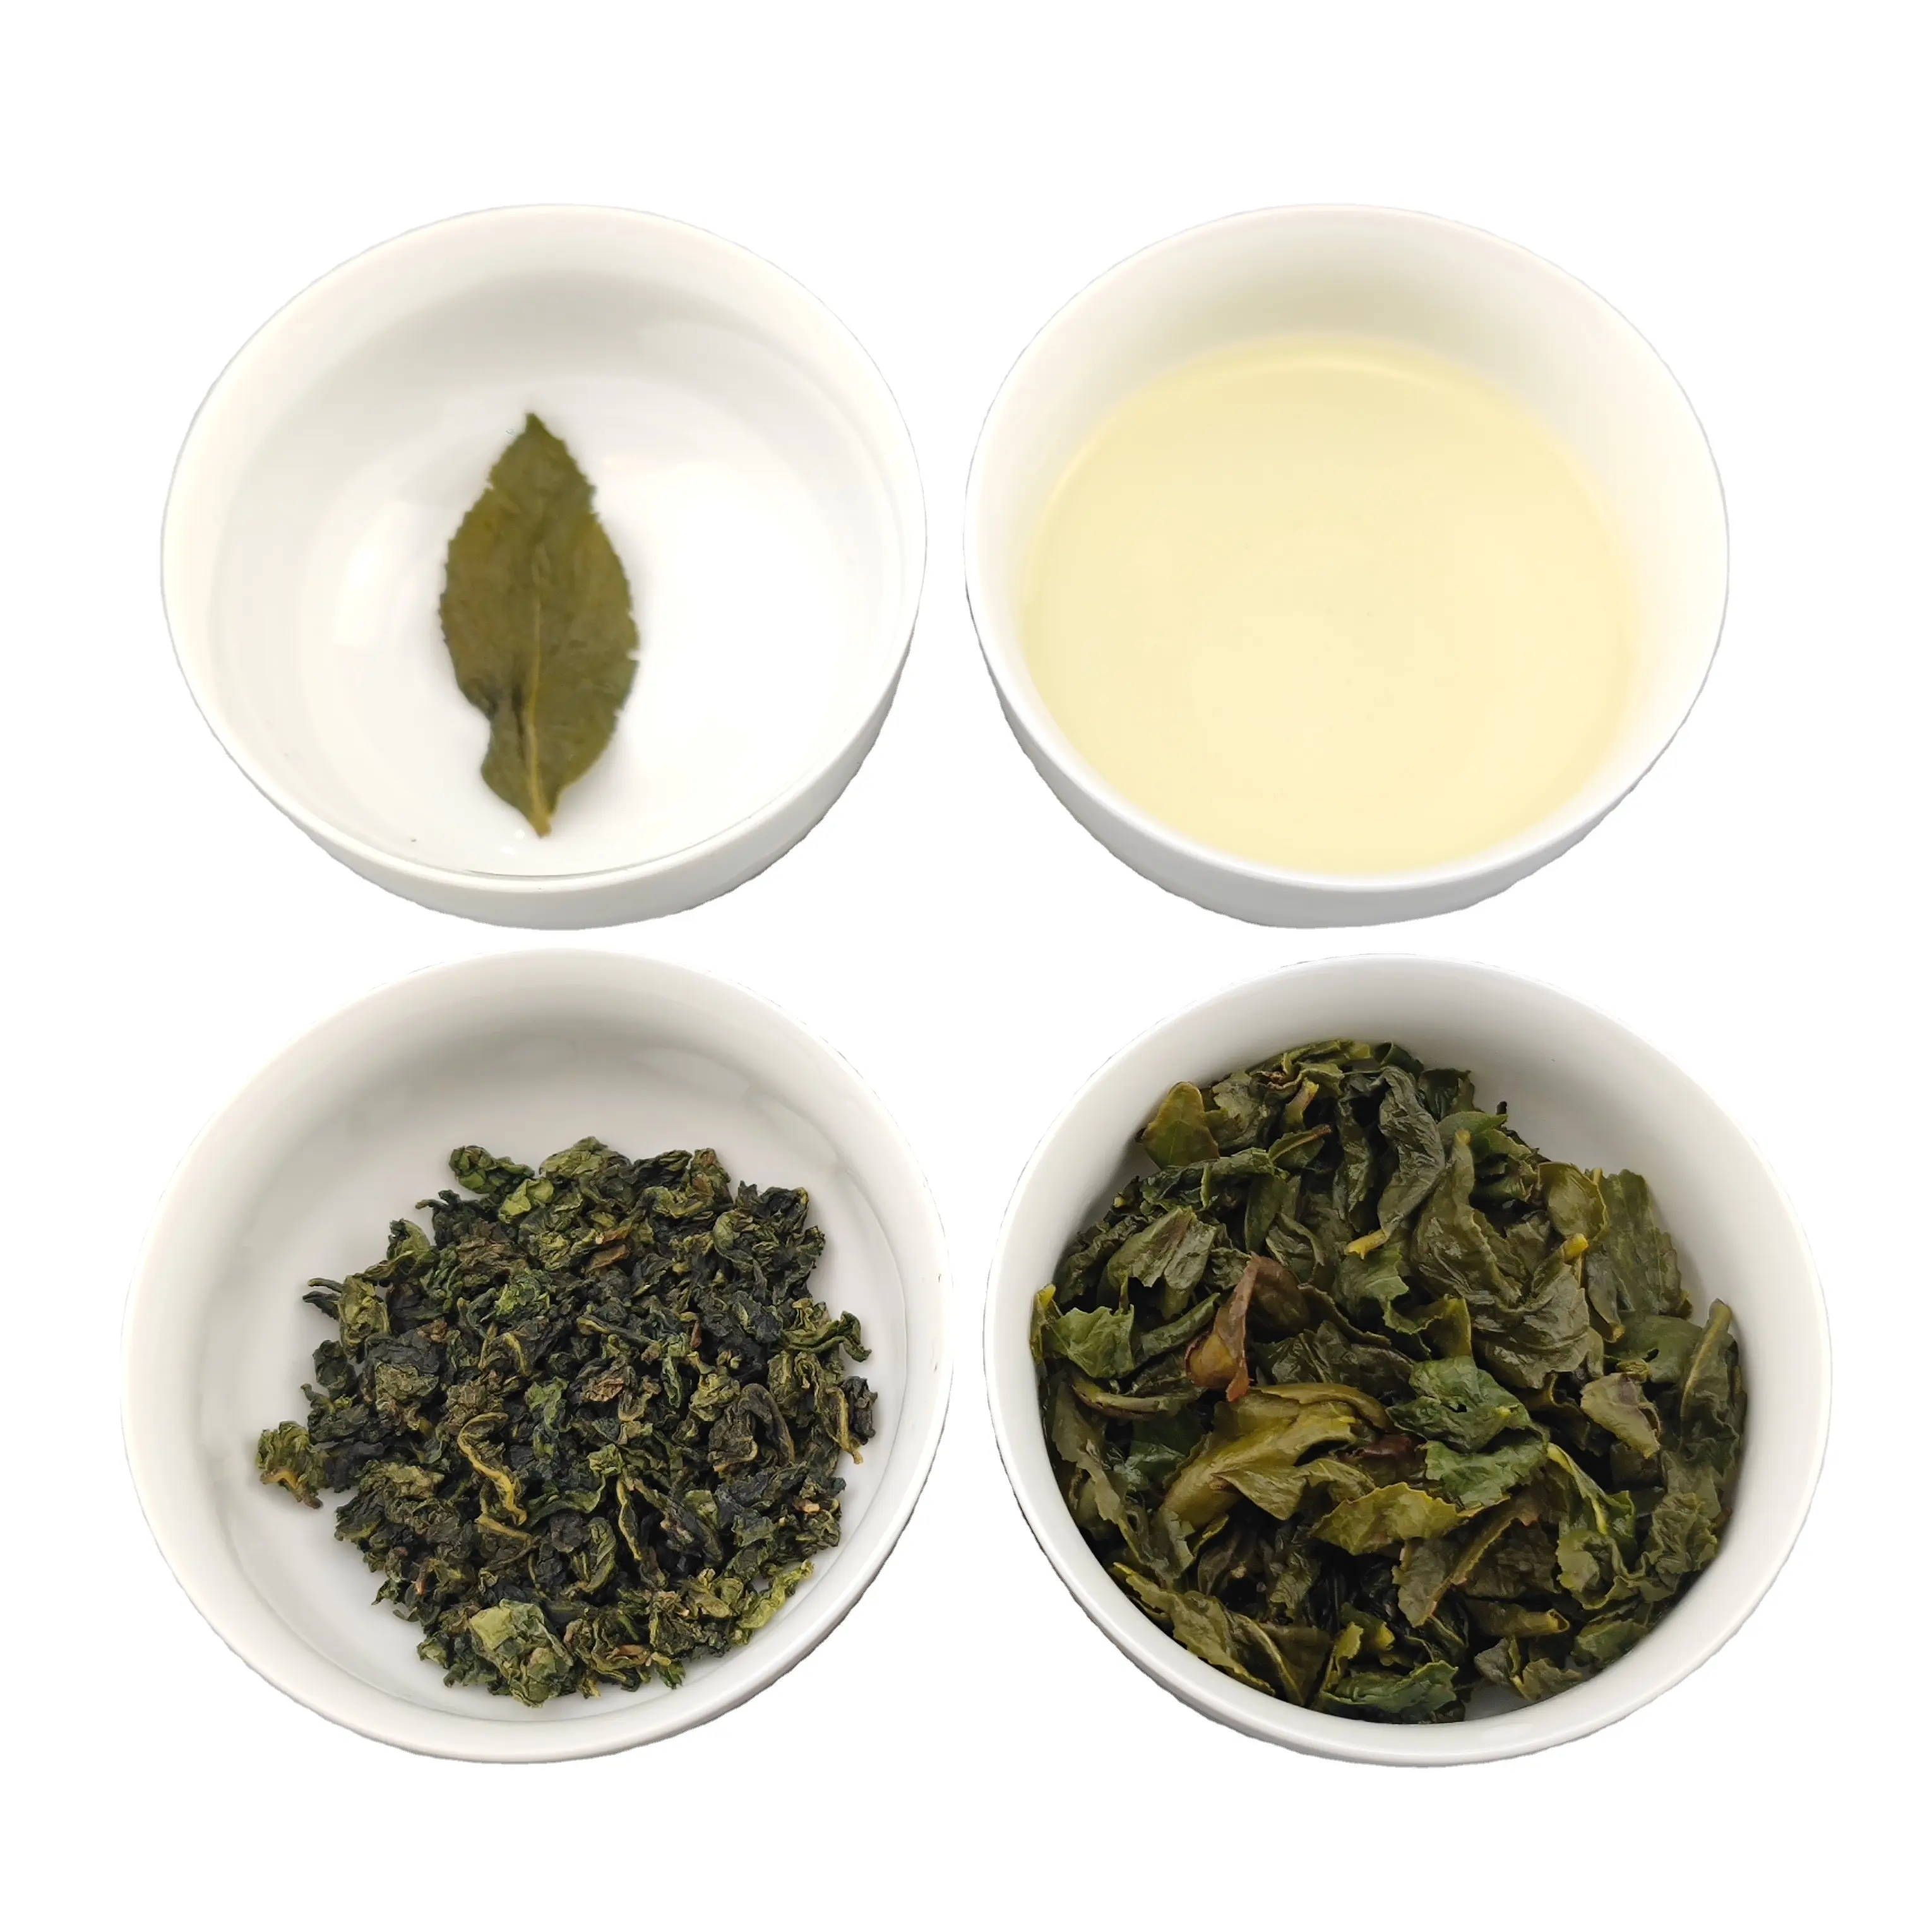 New Promotion Very Green And Fragrant China's Unique Tie Guan Yin Fujian Refine Oolong Tea